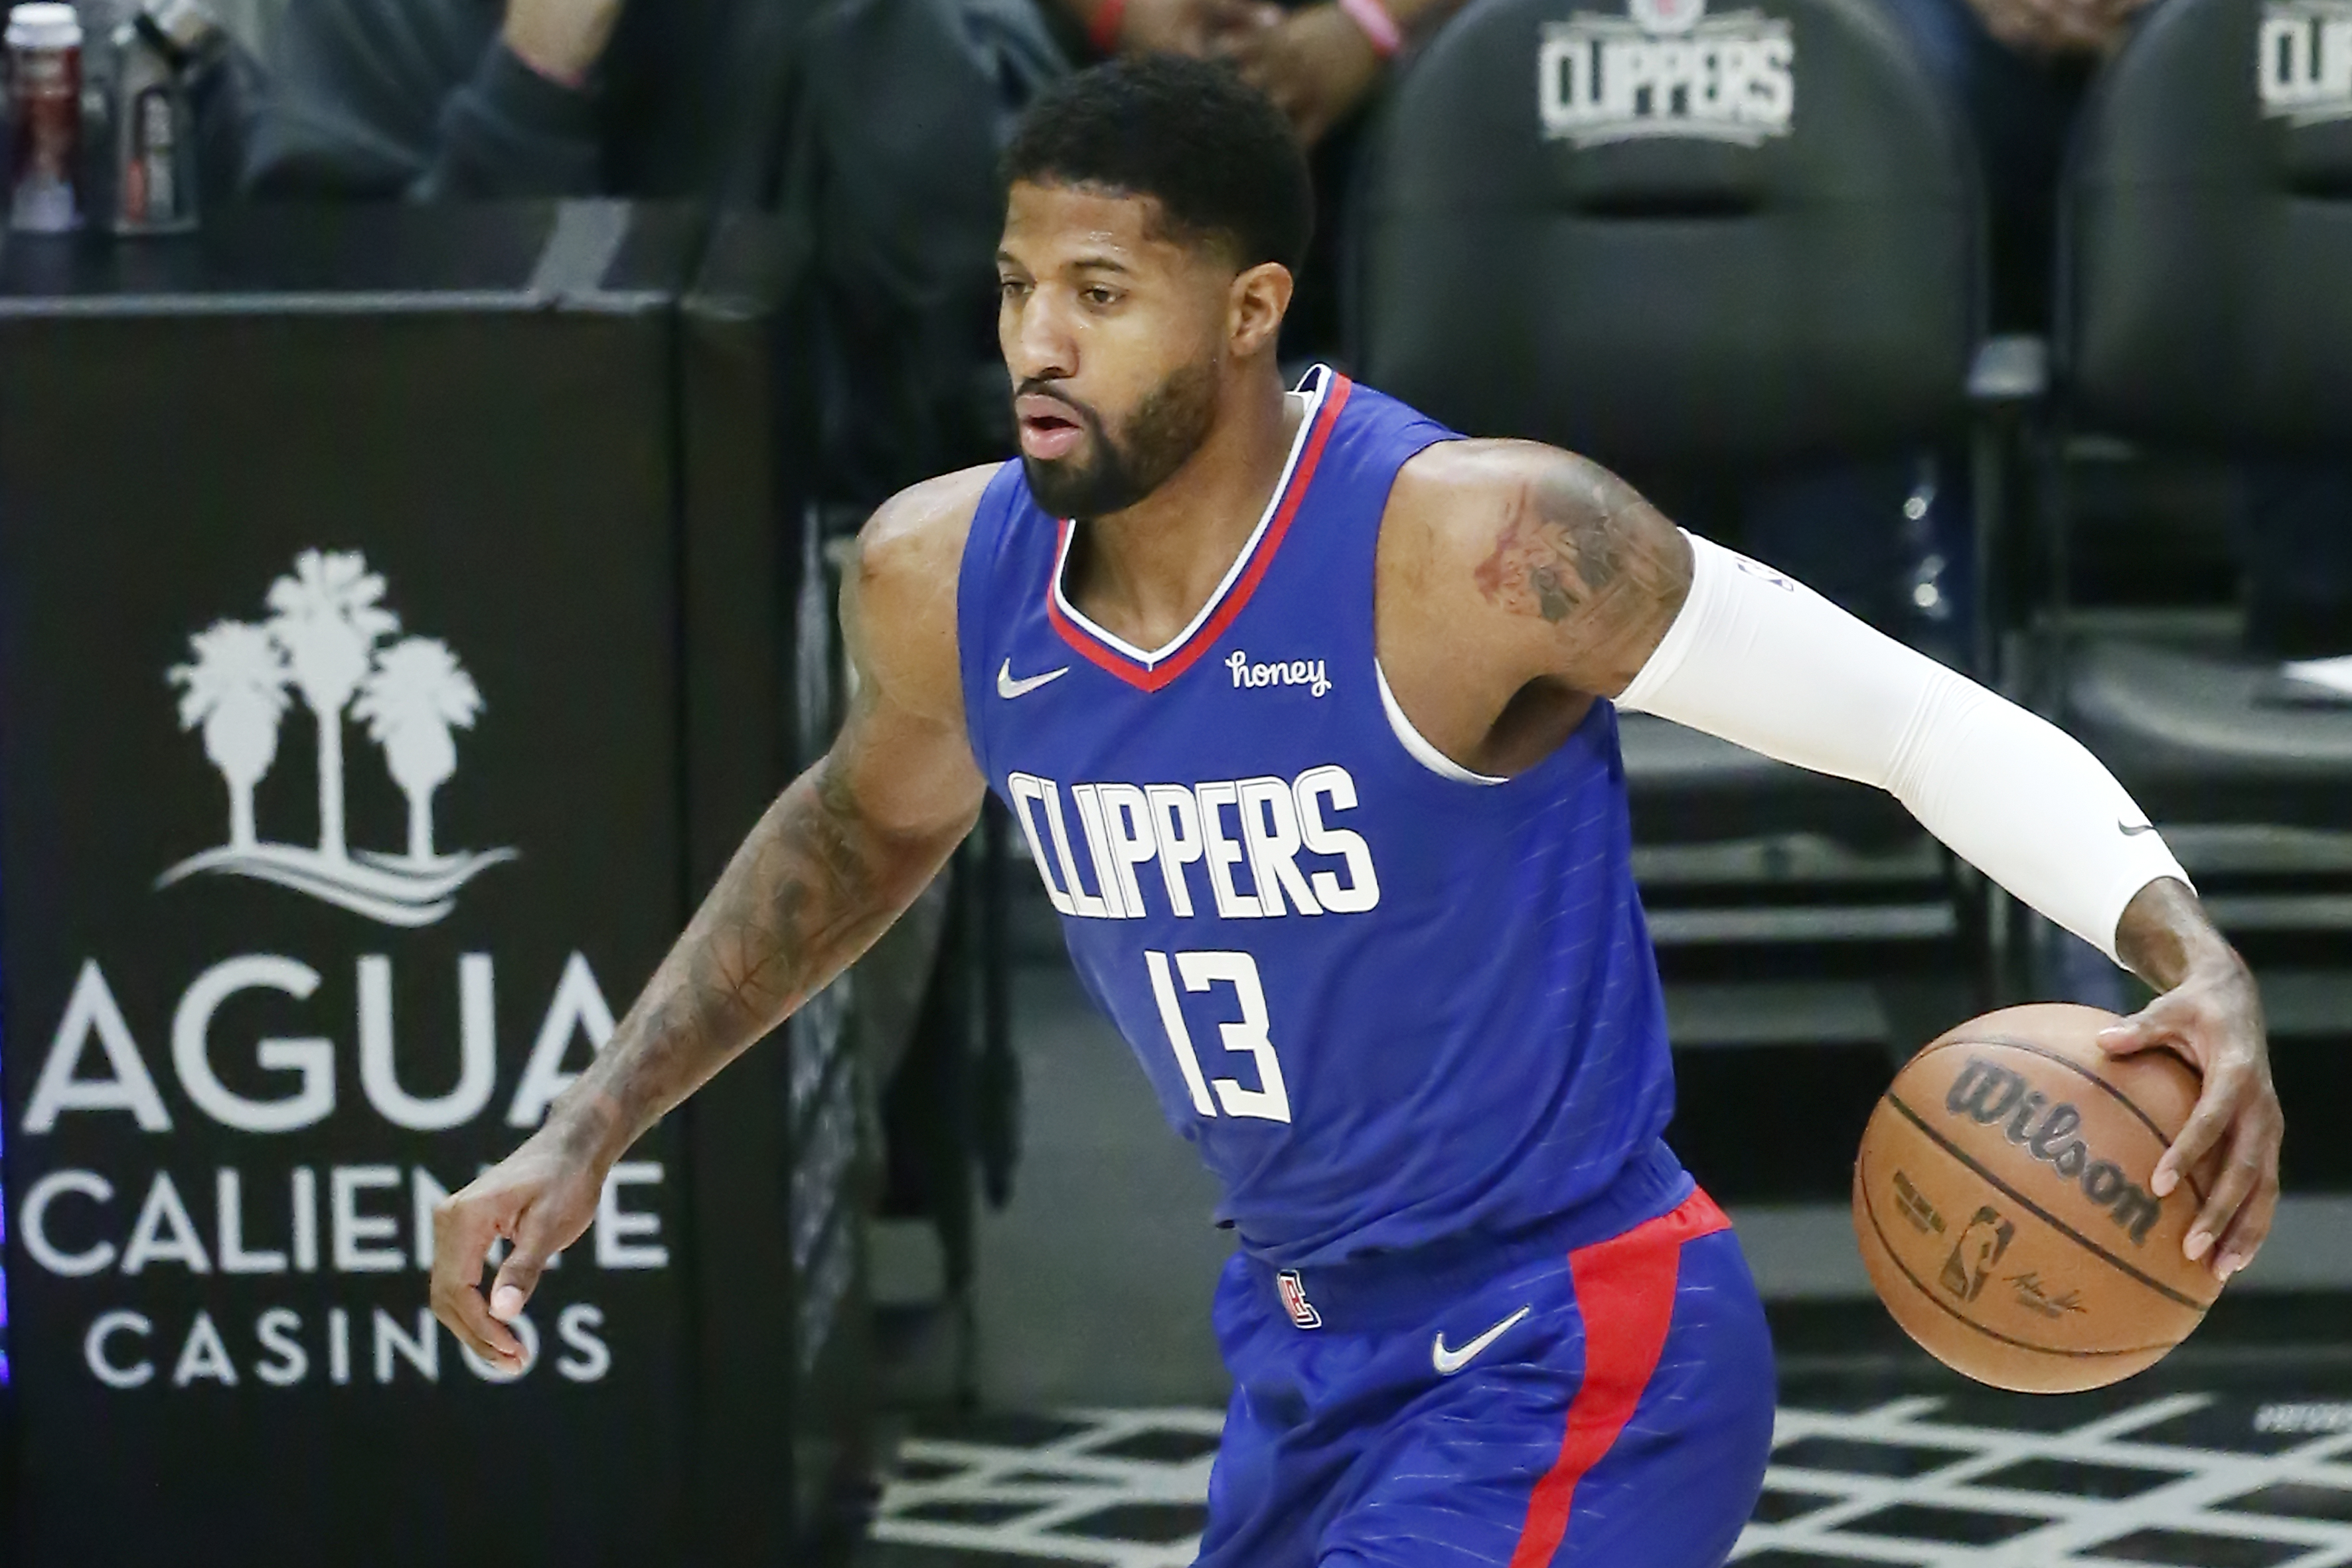 Paul George #13 of the LA Clippers dribbles the ball during a game at the STAPLES Center on December 20, 2021 in Los Angeles, California.